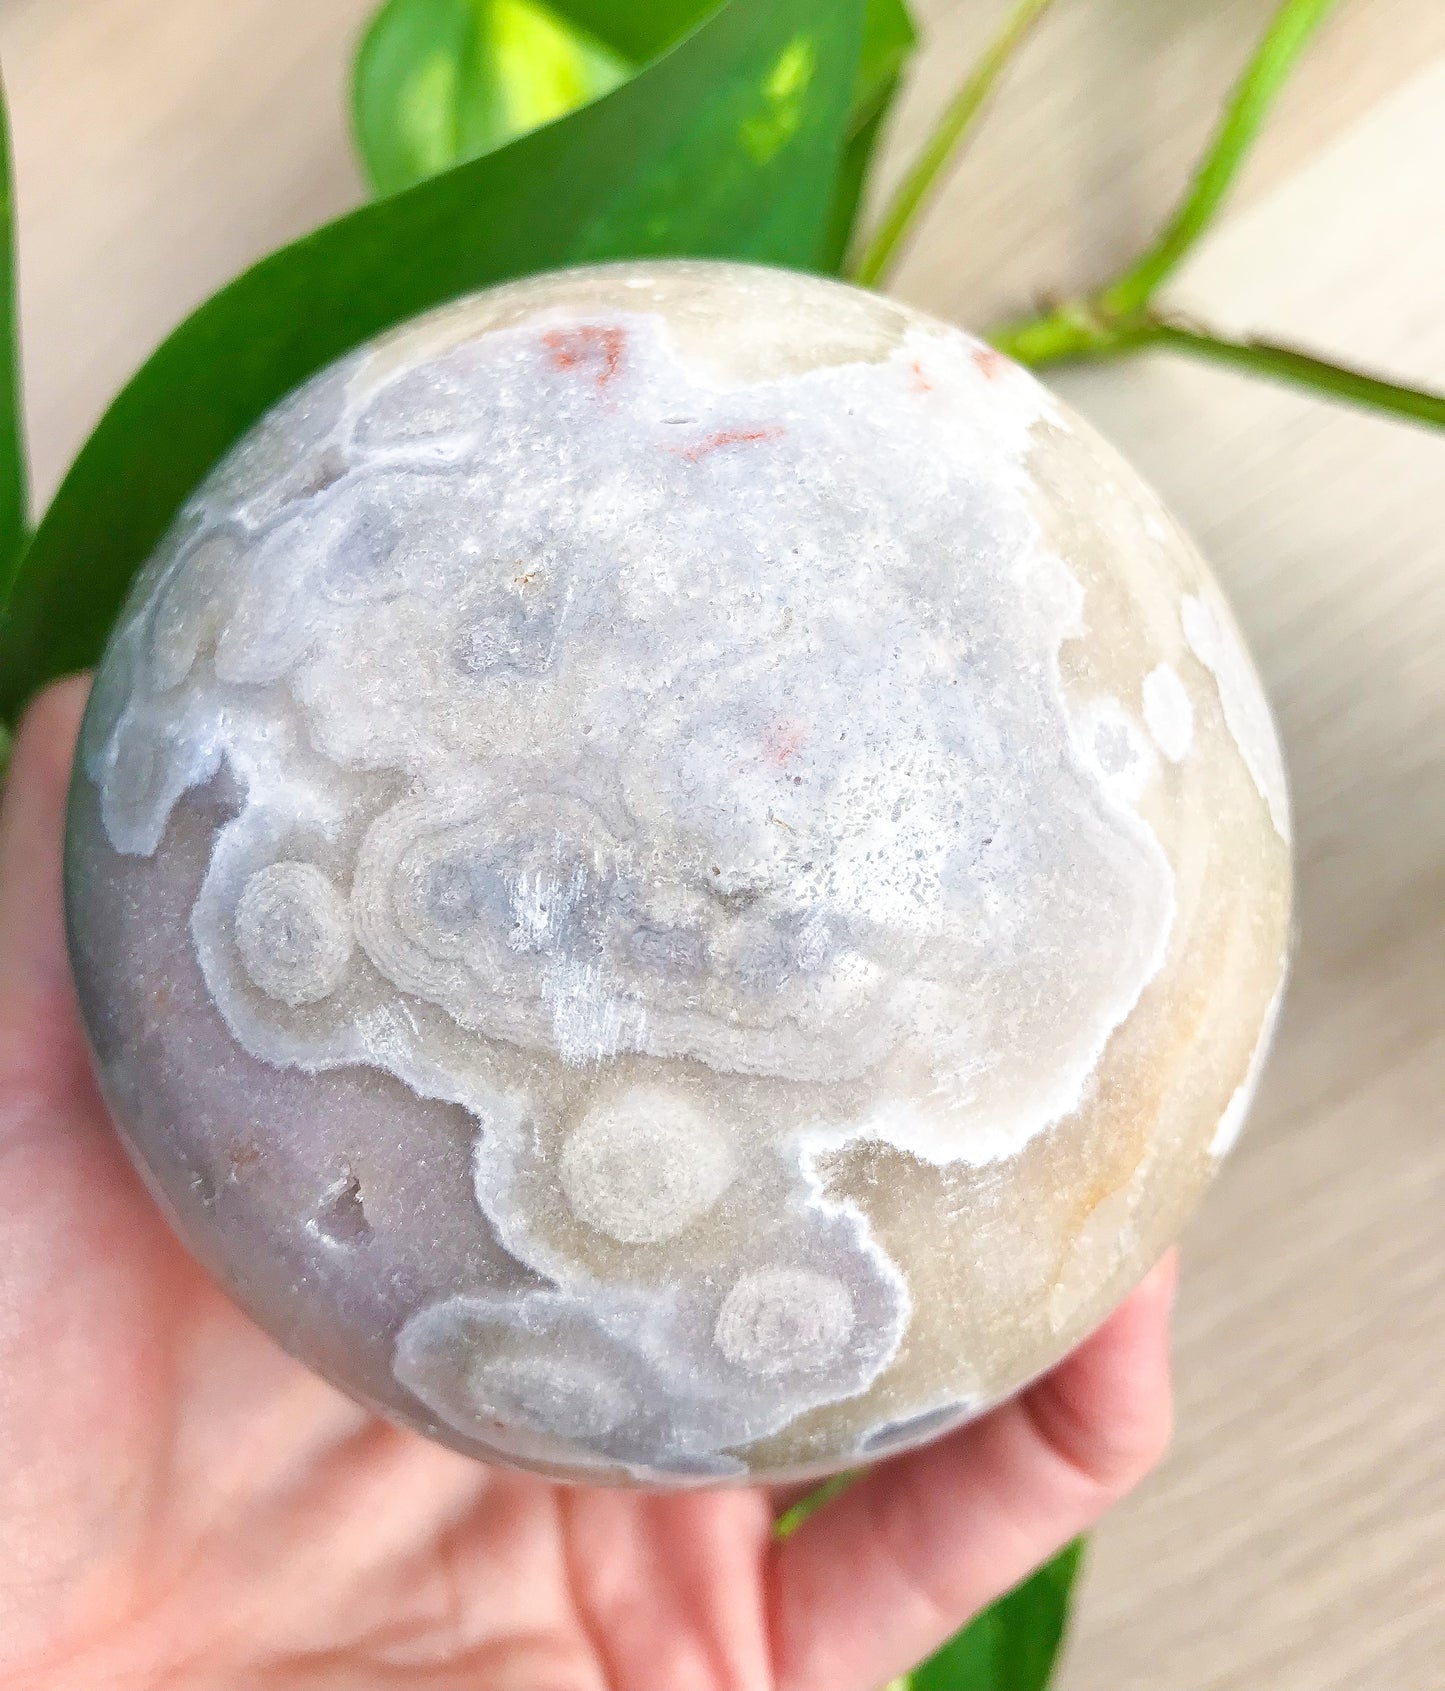 Sparkly Orbicular Flower Pink Amethyst Sphere w/Agate Inclusions